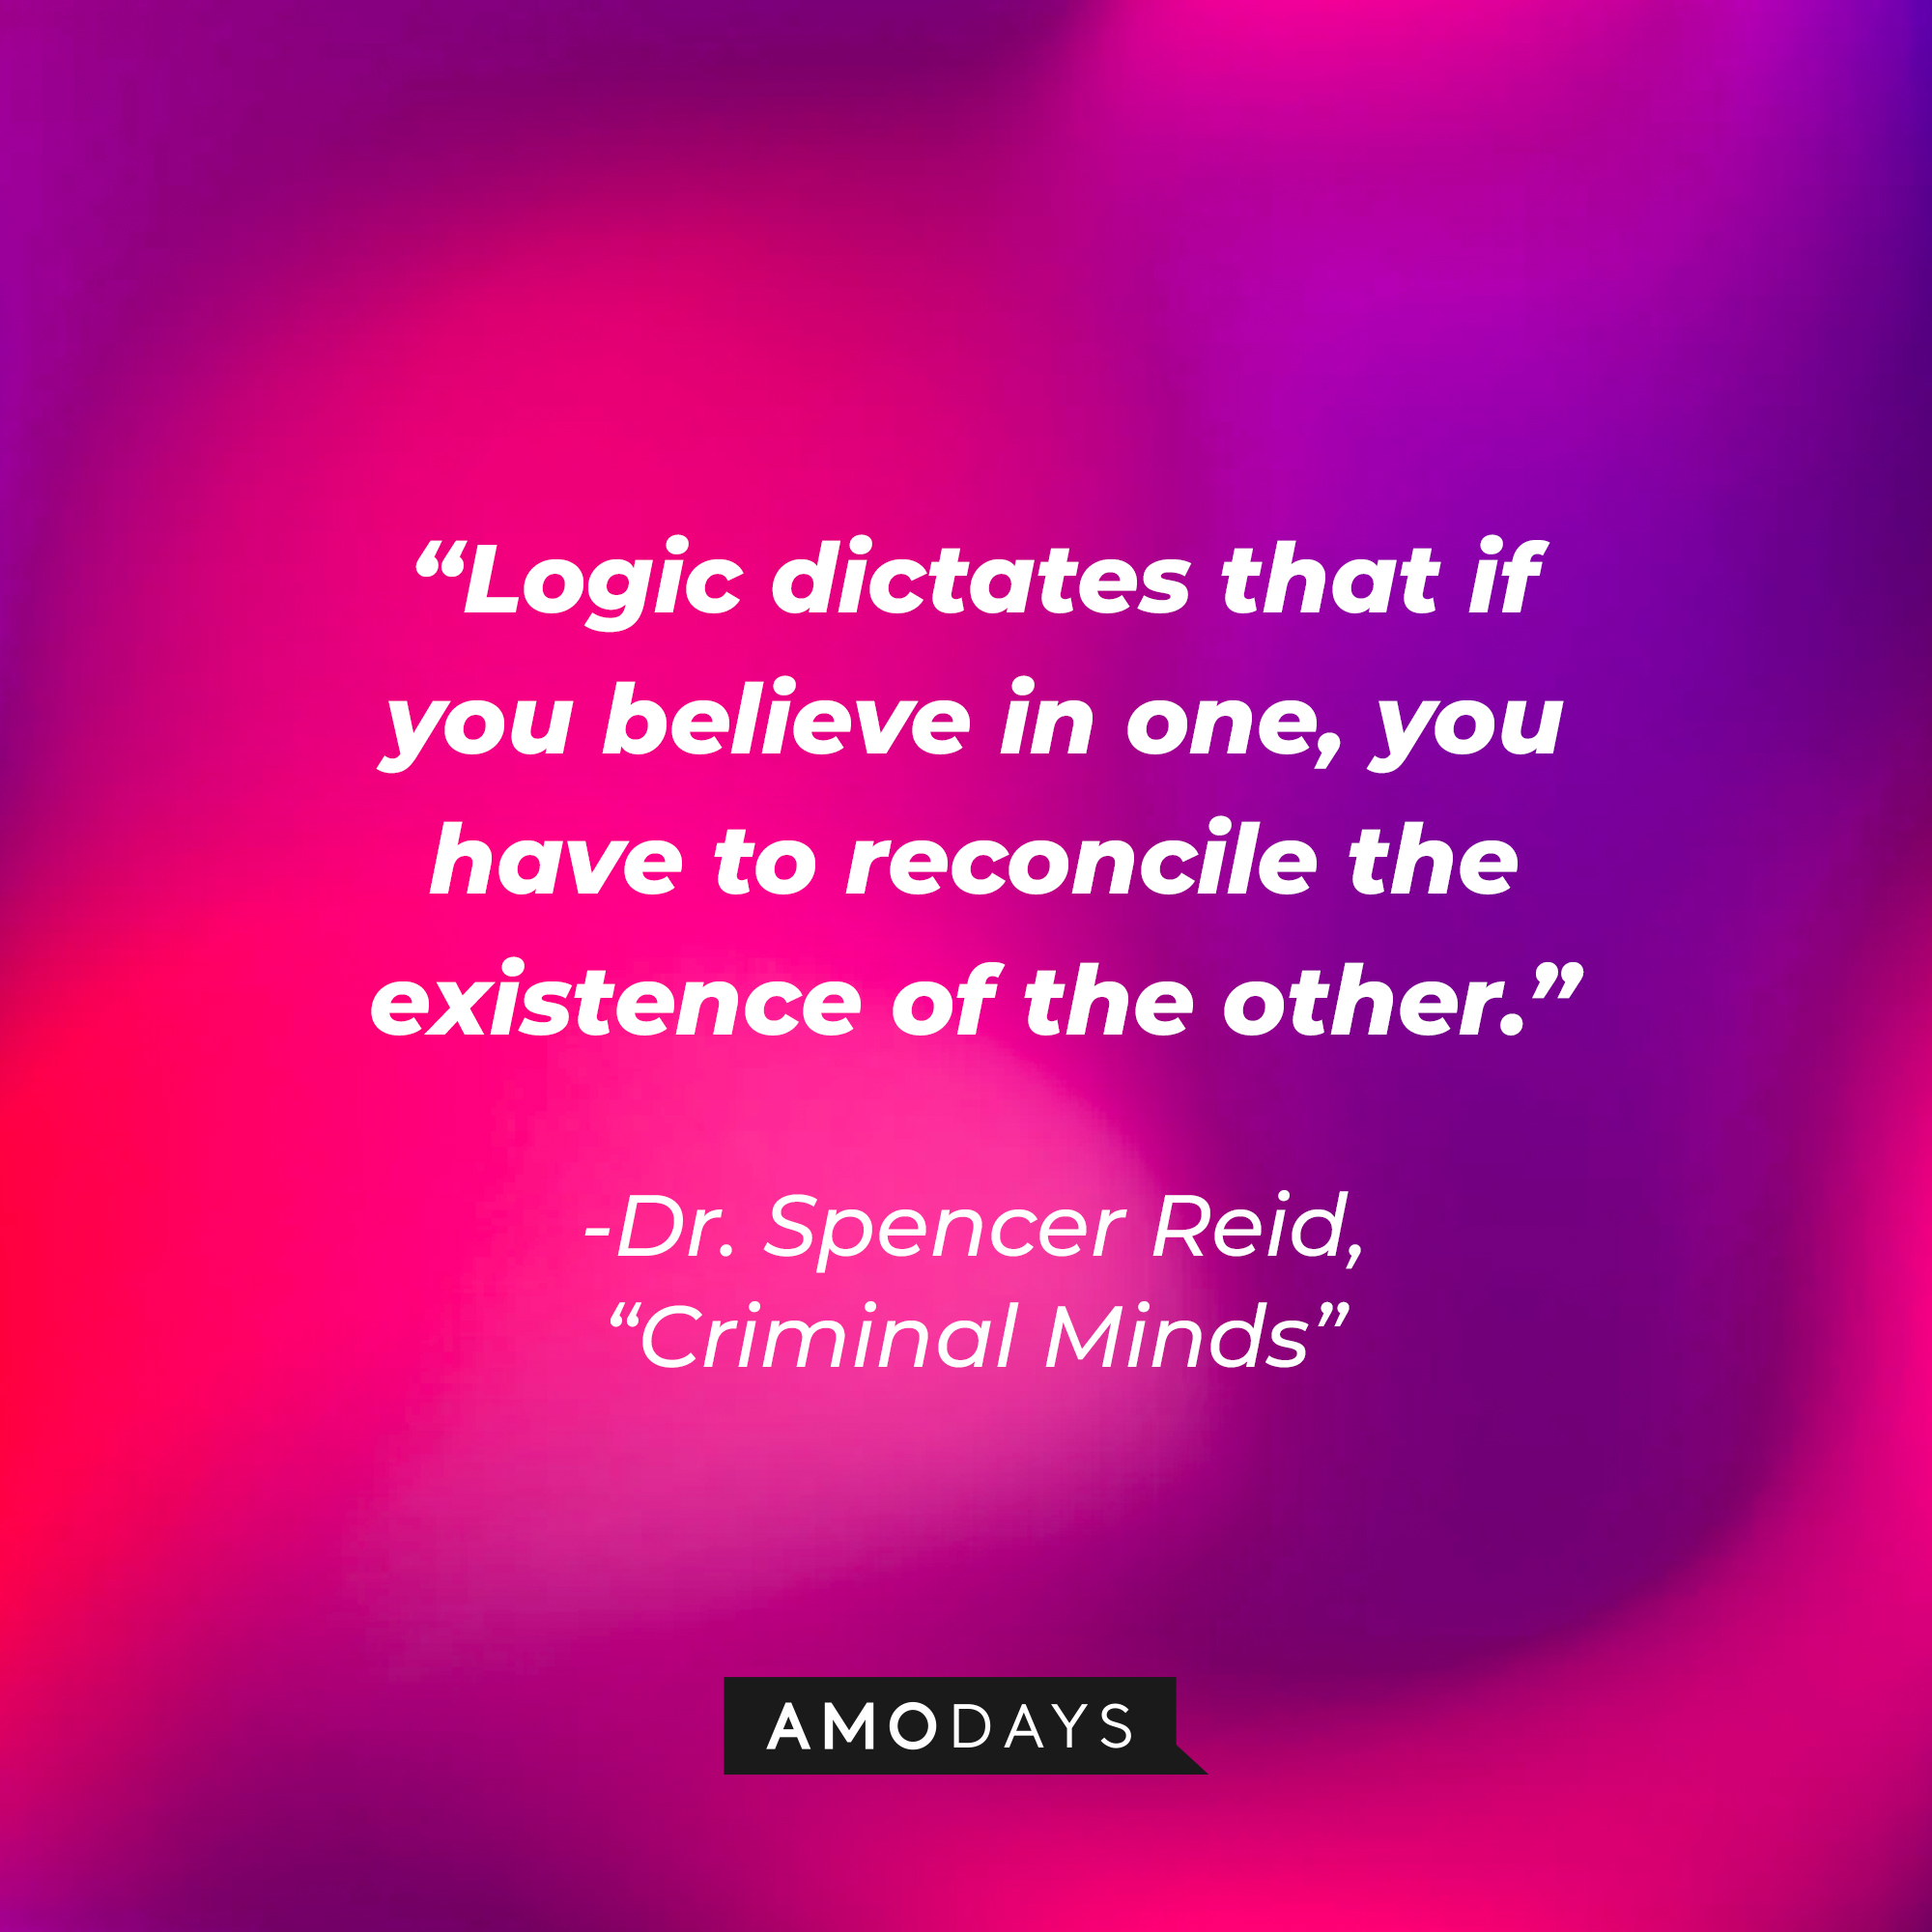 Dr. Spencer Reid's quote: “Logic dictates that if you believe in one, you have to reconcile the existence of the other.” | Source: Amodays